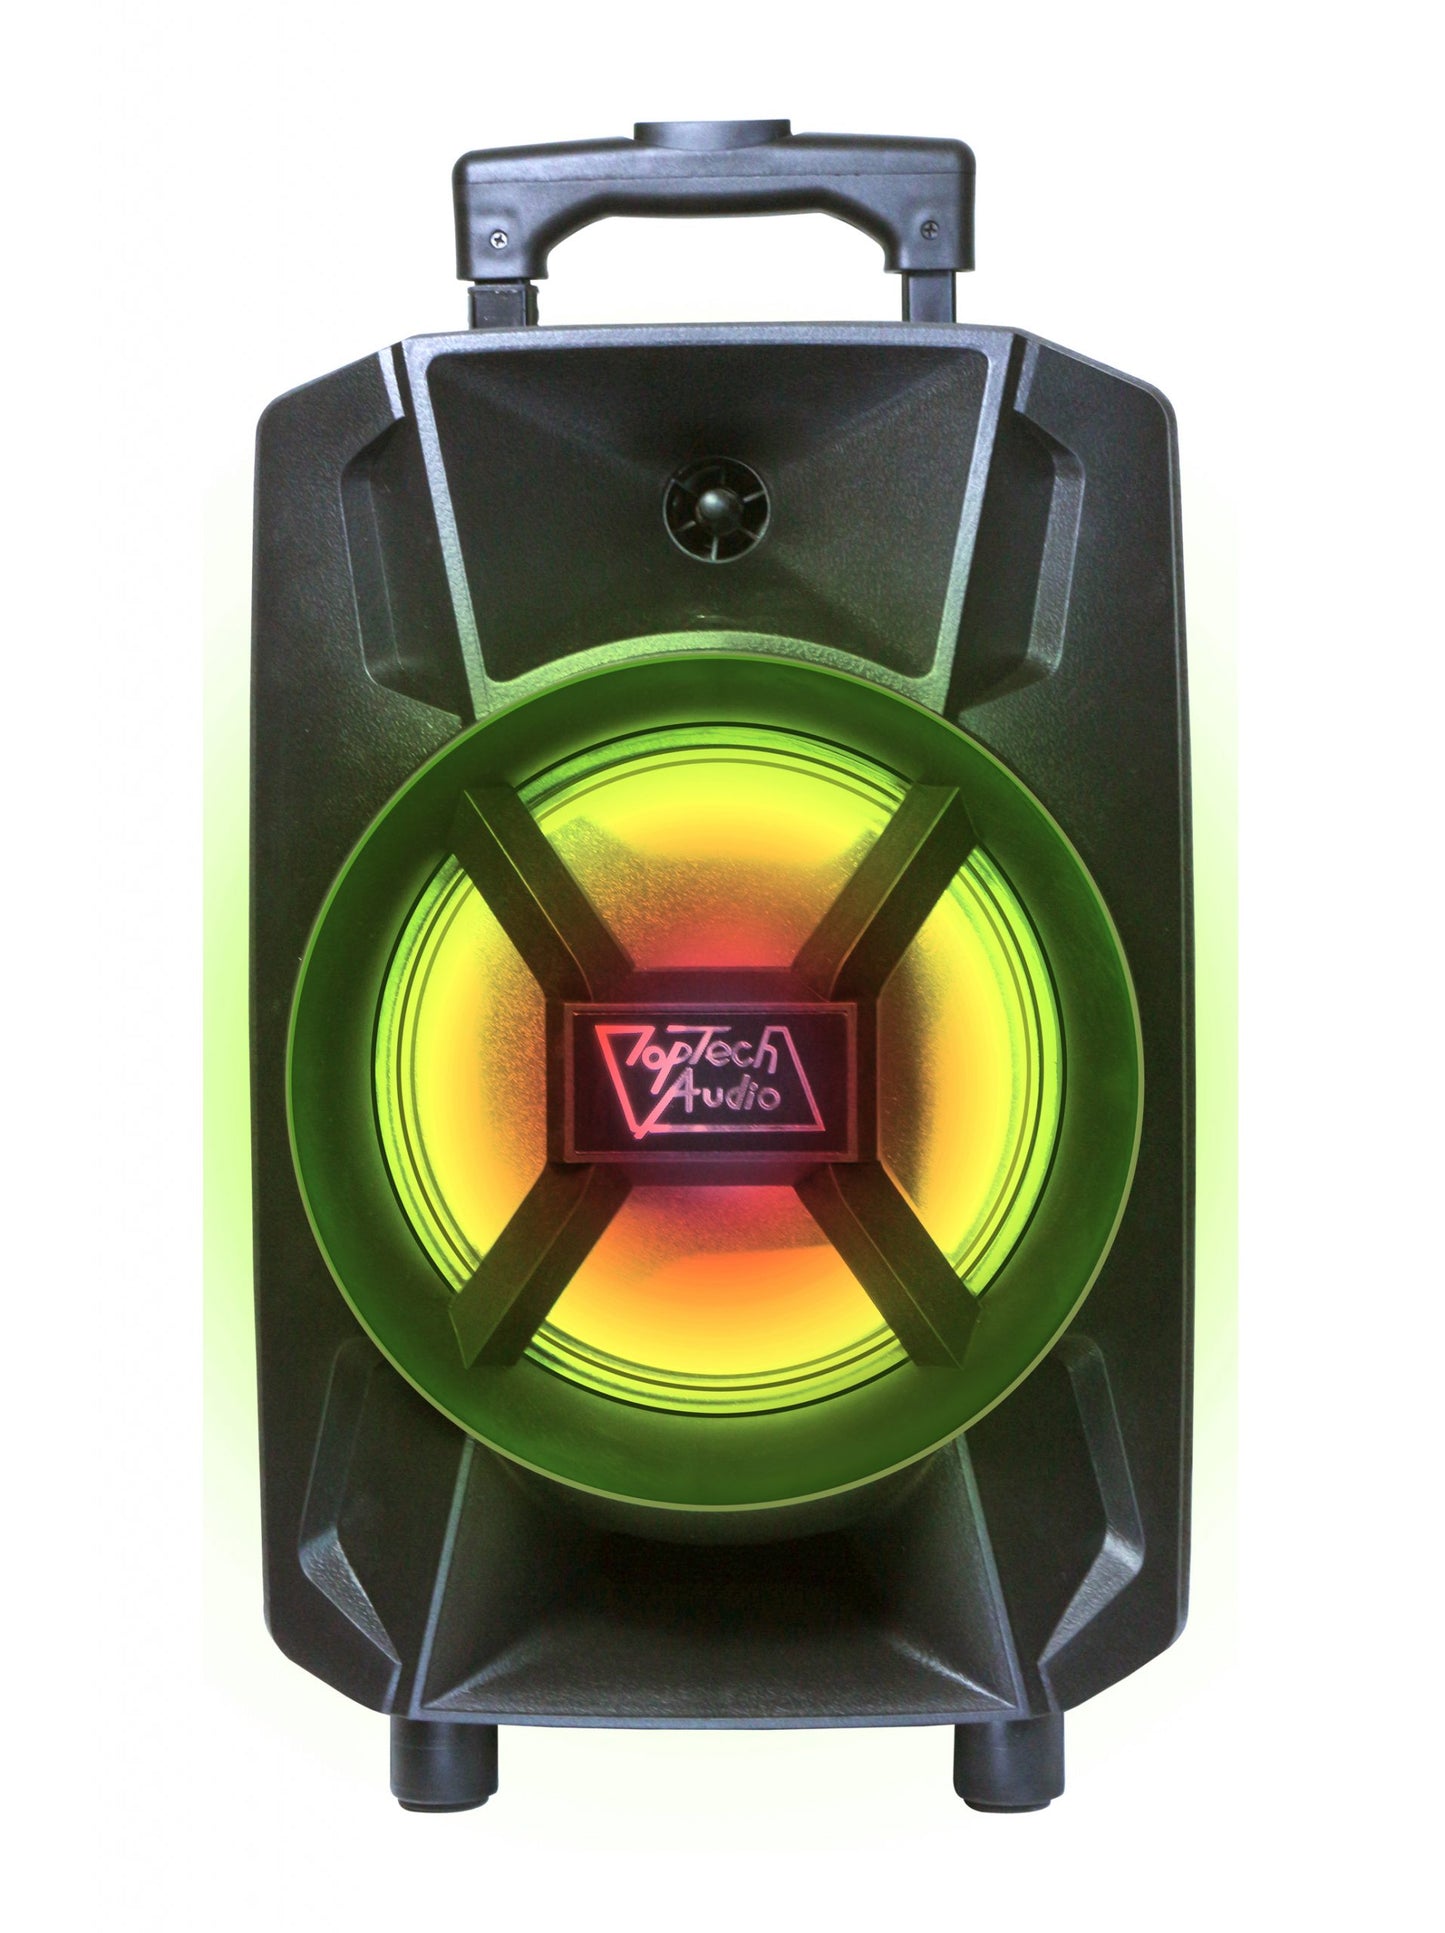 Fully Amplified Portable 1500 Watts Peak Power 8” Speaker with LED LIGHT